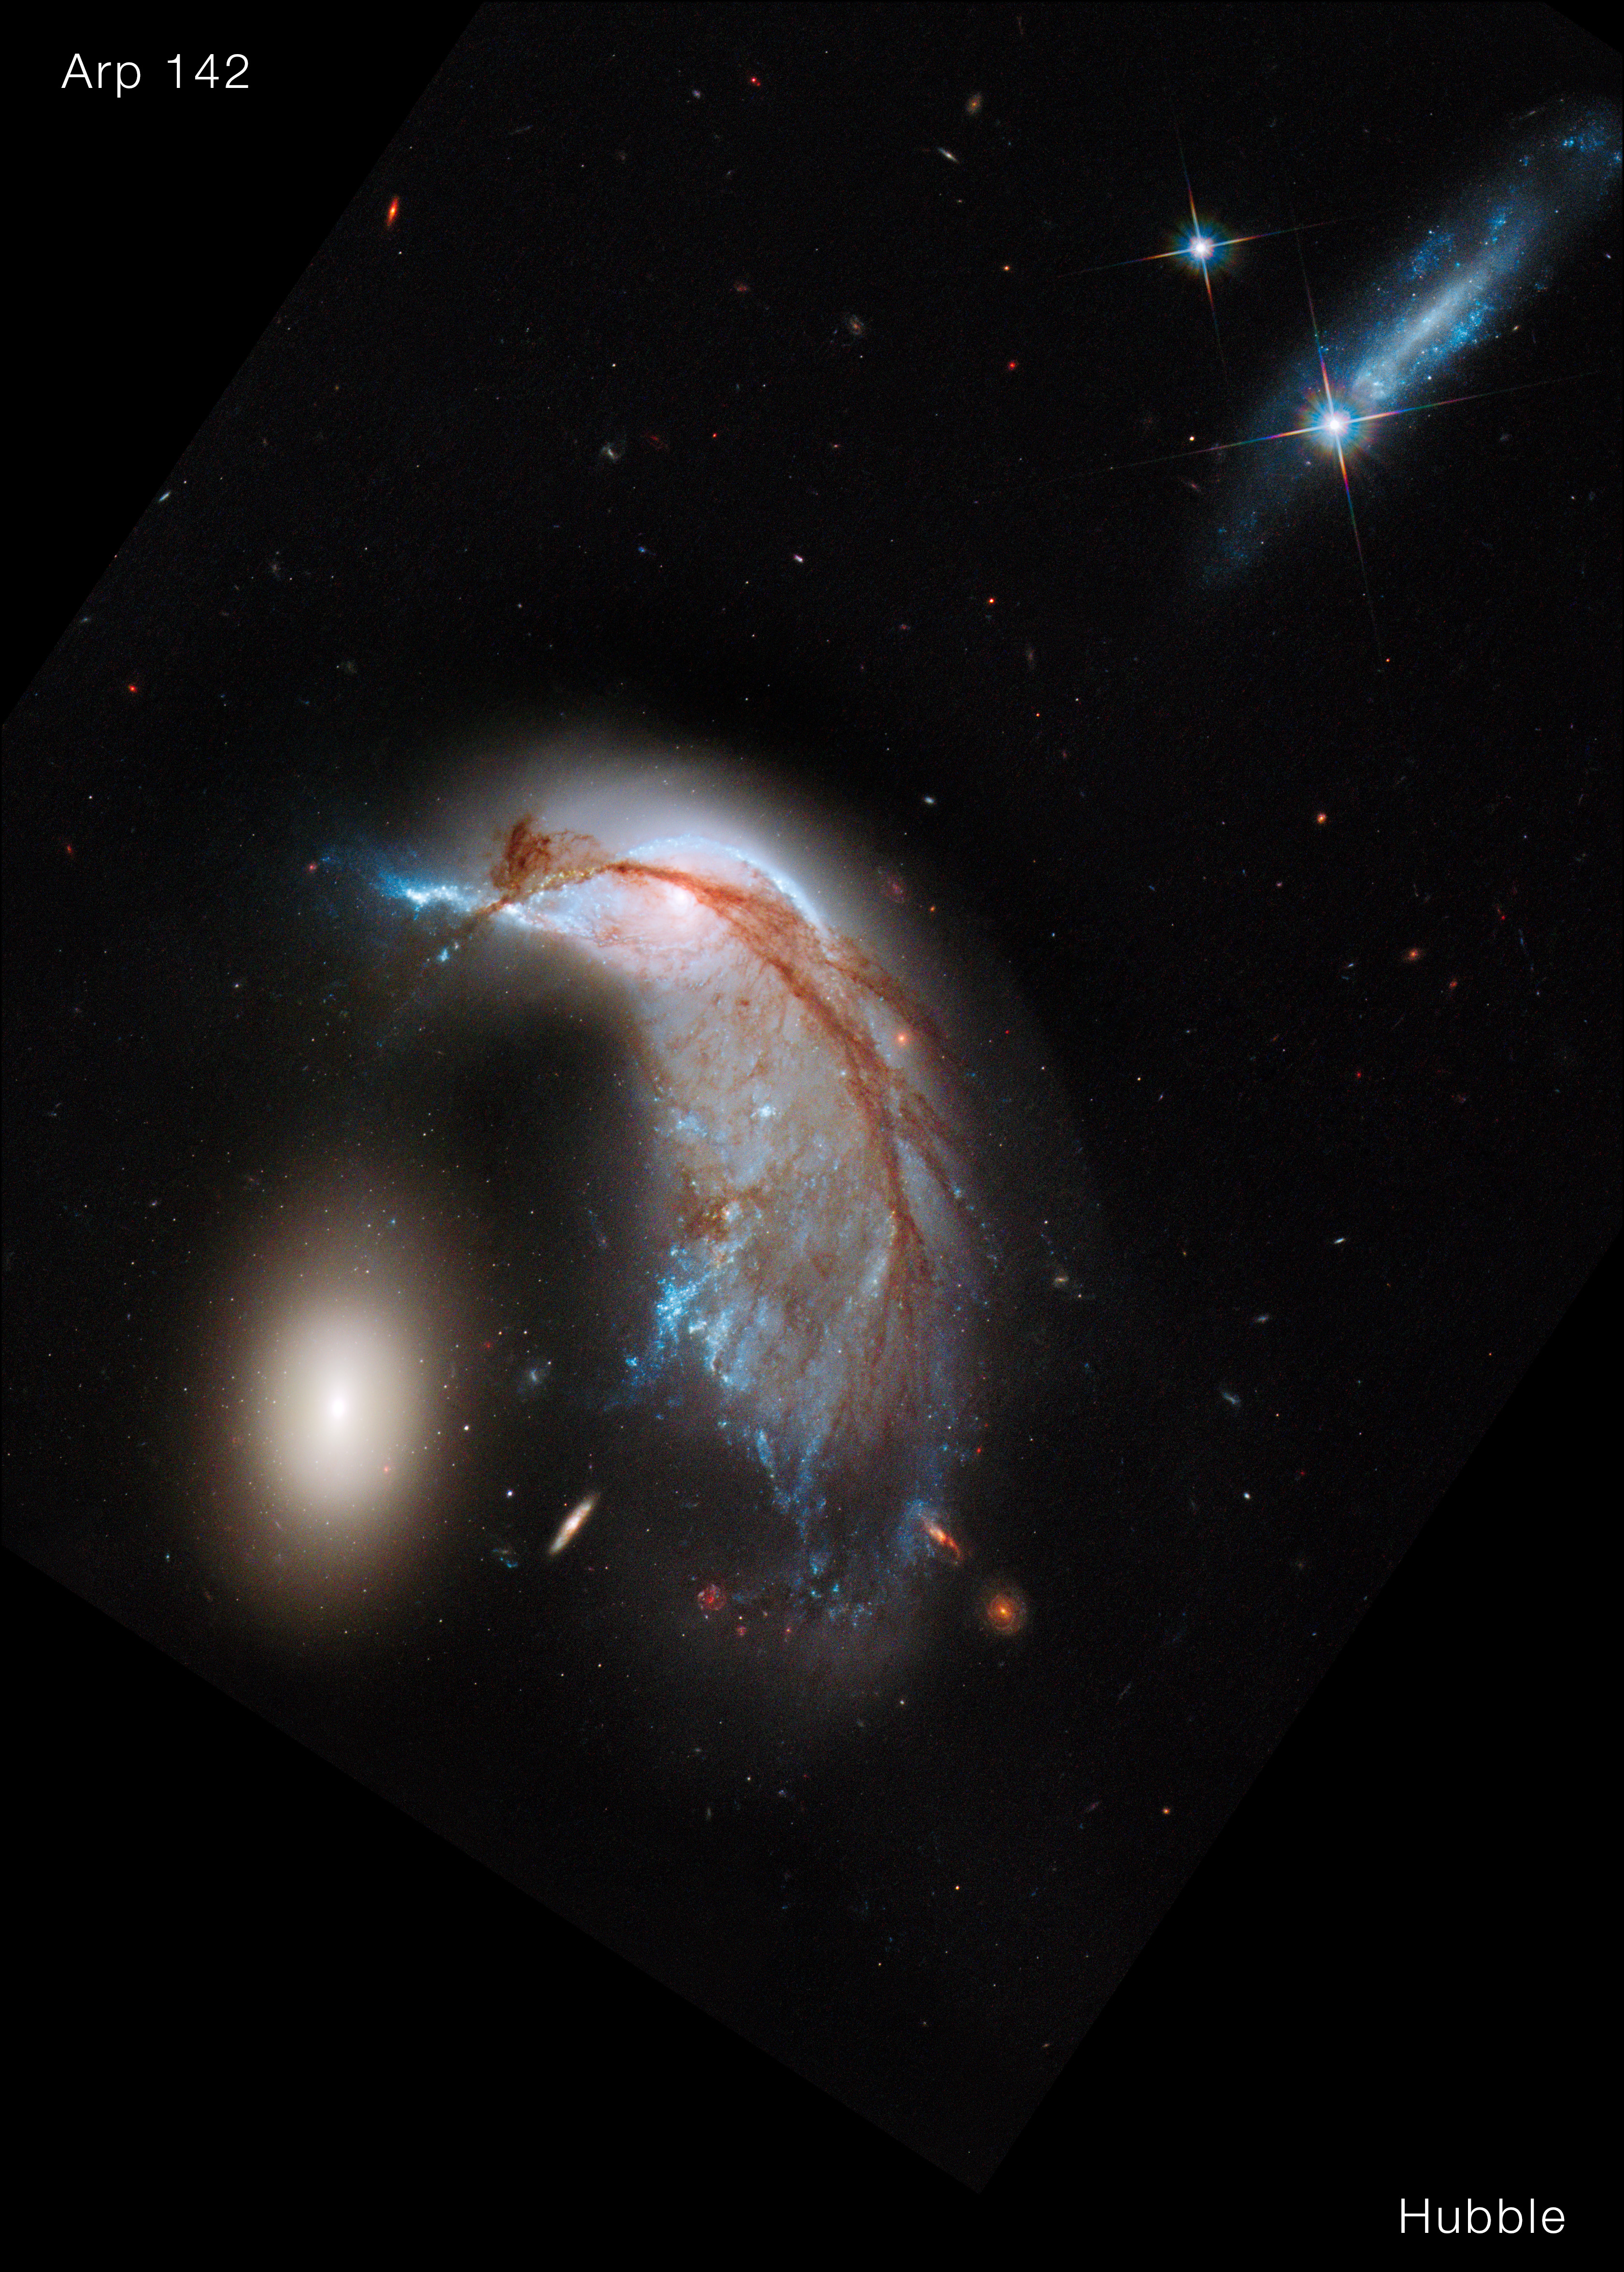 Hubbles view of a frame split down the middle: Hubble’s visible light image at left, and Webb’s near-infrared image at right. Both show the Egg at left and the Penguin at right. In Hubble’s view, the Penguin is highly detailed, with a bright blue beak, body, and tail that is covered in an arc of bright brown dust. The Egg, to its left, appears bright, gleaming yellowish white. At top right is another galaxy seen from the side, about as long as the Egg’s height. Dozens of galaxies and stars appear in the background. Webb’s near-infrared image shows the Penguin’s beak, head, and back in shades of pink. It’s tail-like region is more diffuse, and a mix of lighter pinks and blues. The Egg appears slightly larger in blue layers. A semi-transparent blue forms an upside down U overtop both galaxies. At top right, an edge-on galaxy has many more pinpricks of light, which are stars. Thousands of galaxies and stars appear in the background. Some galaxies are shades of orange, while others are white. Click View Description for additional details.